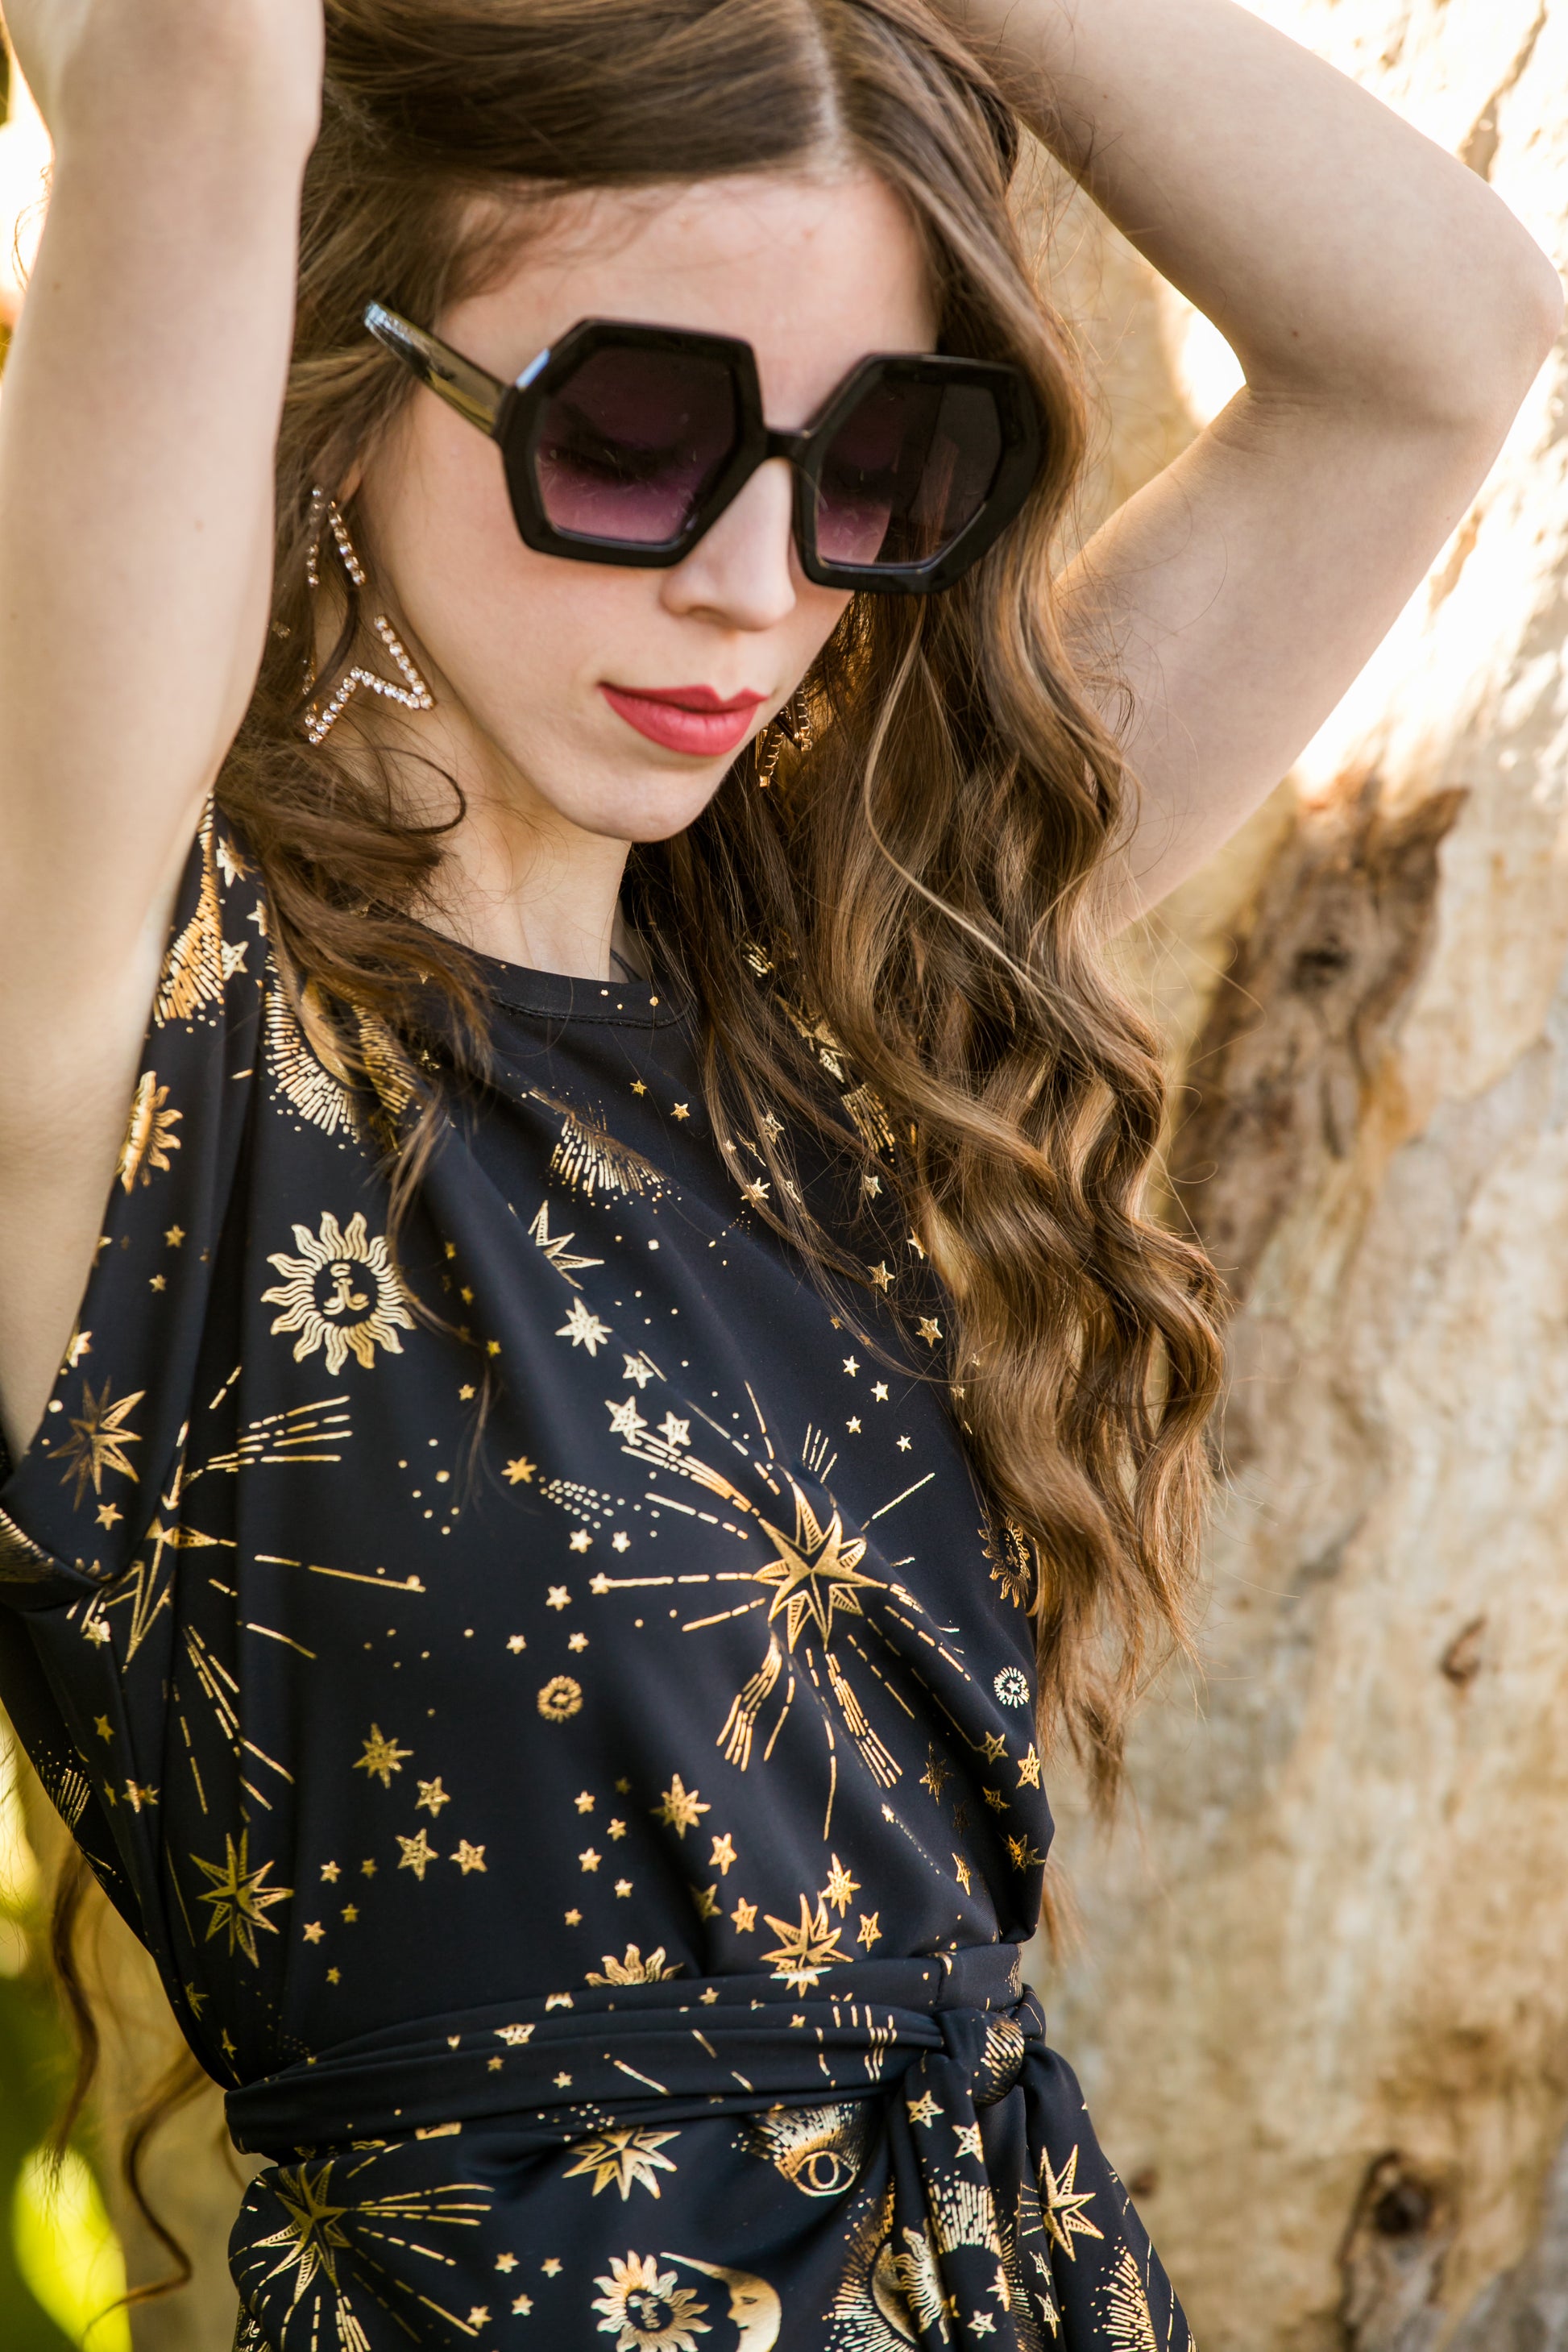 jennafer grace Celestia tunic palazzo pant matching set black with gold metallic celestial print coord co-ord astrology goth witchy gothic boho bohemian hippie romantic whimsical lounge loungewear resort cabana beach unisex handmade in california usa